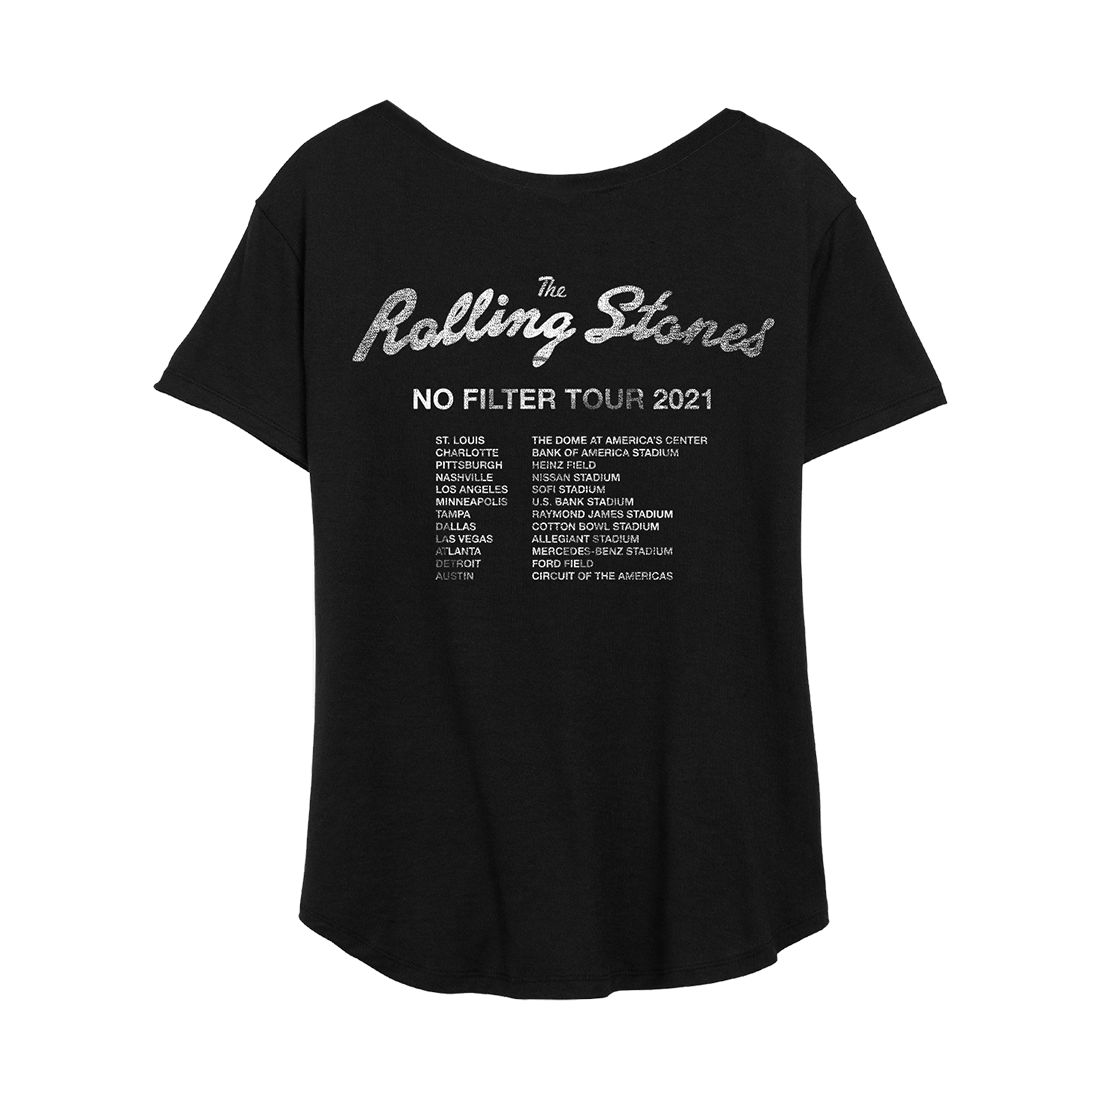 The Rolling Stones - No Filter 2021 Ladies Fit T-Shirt